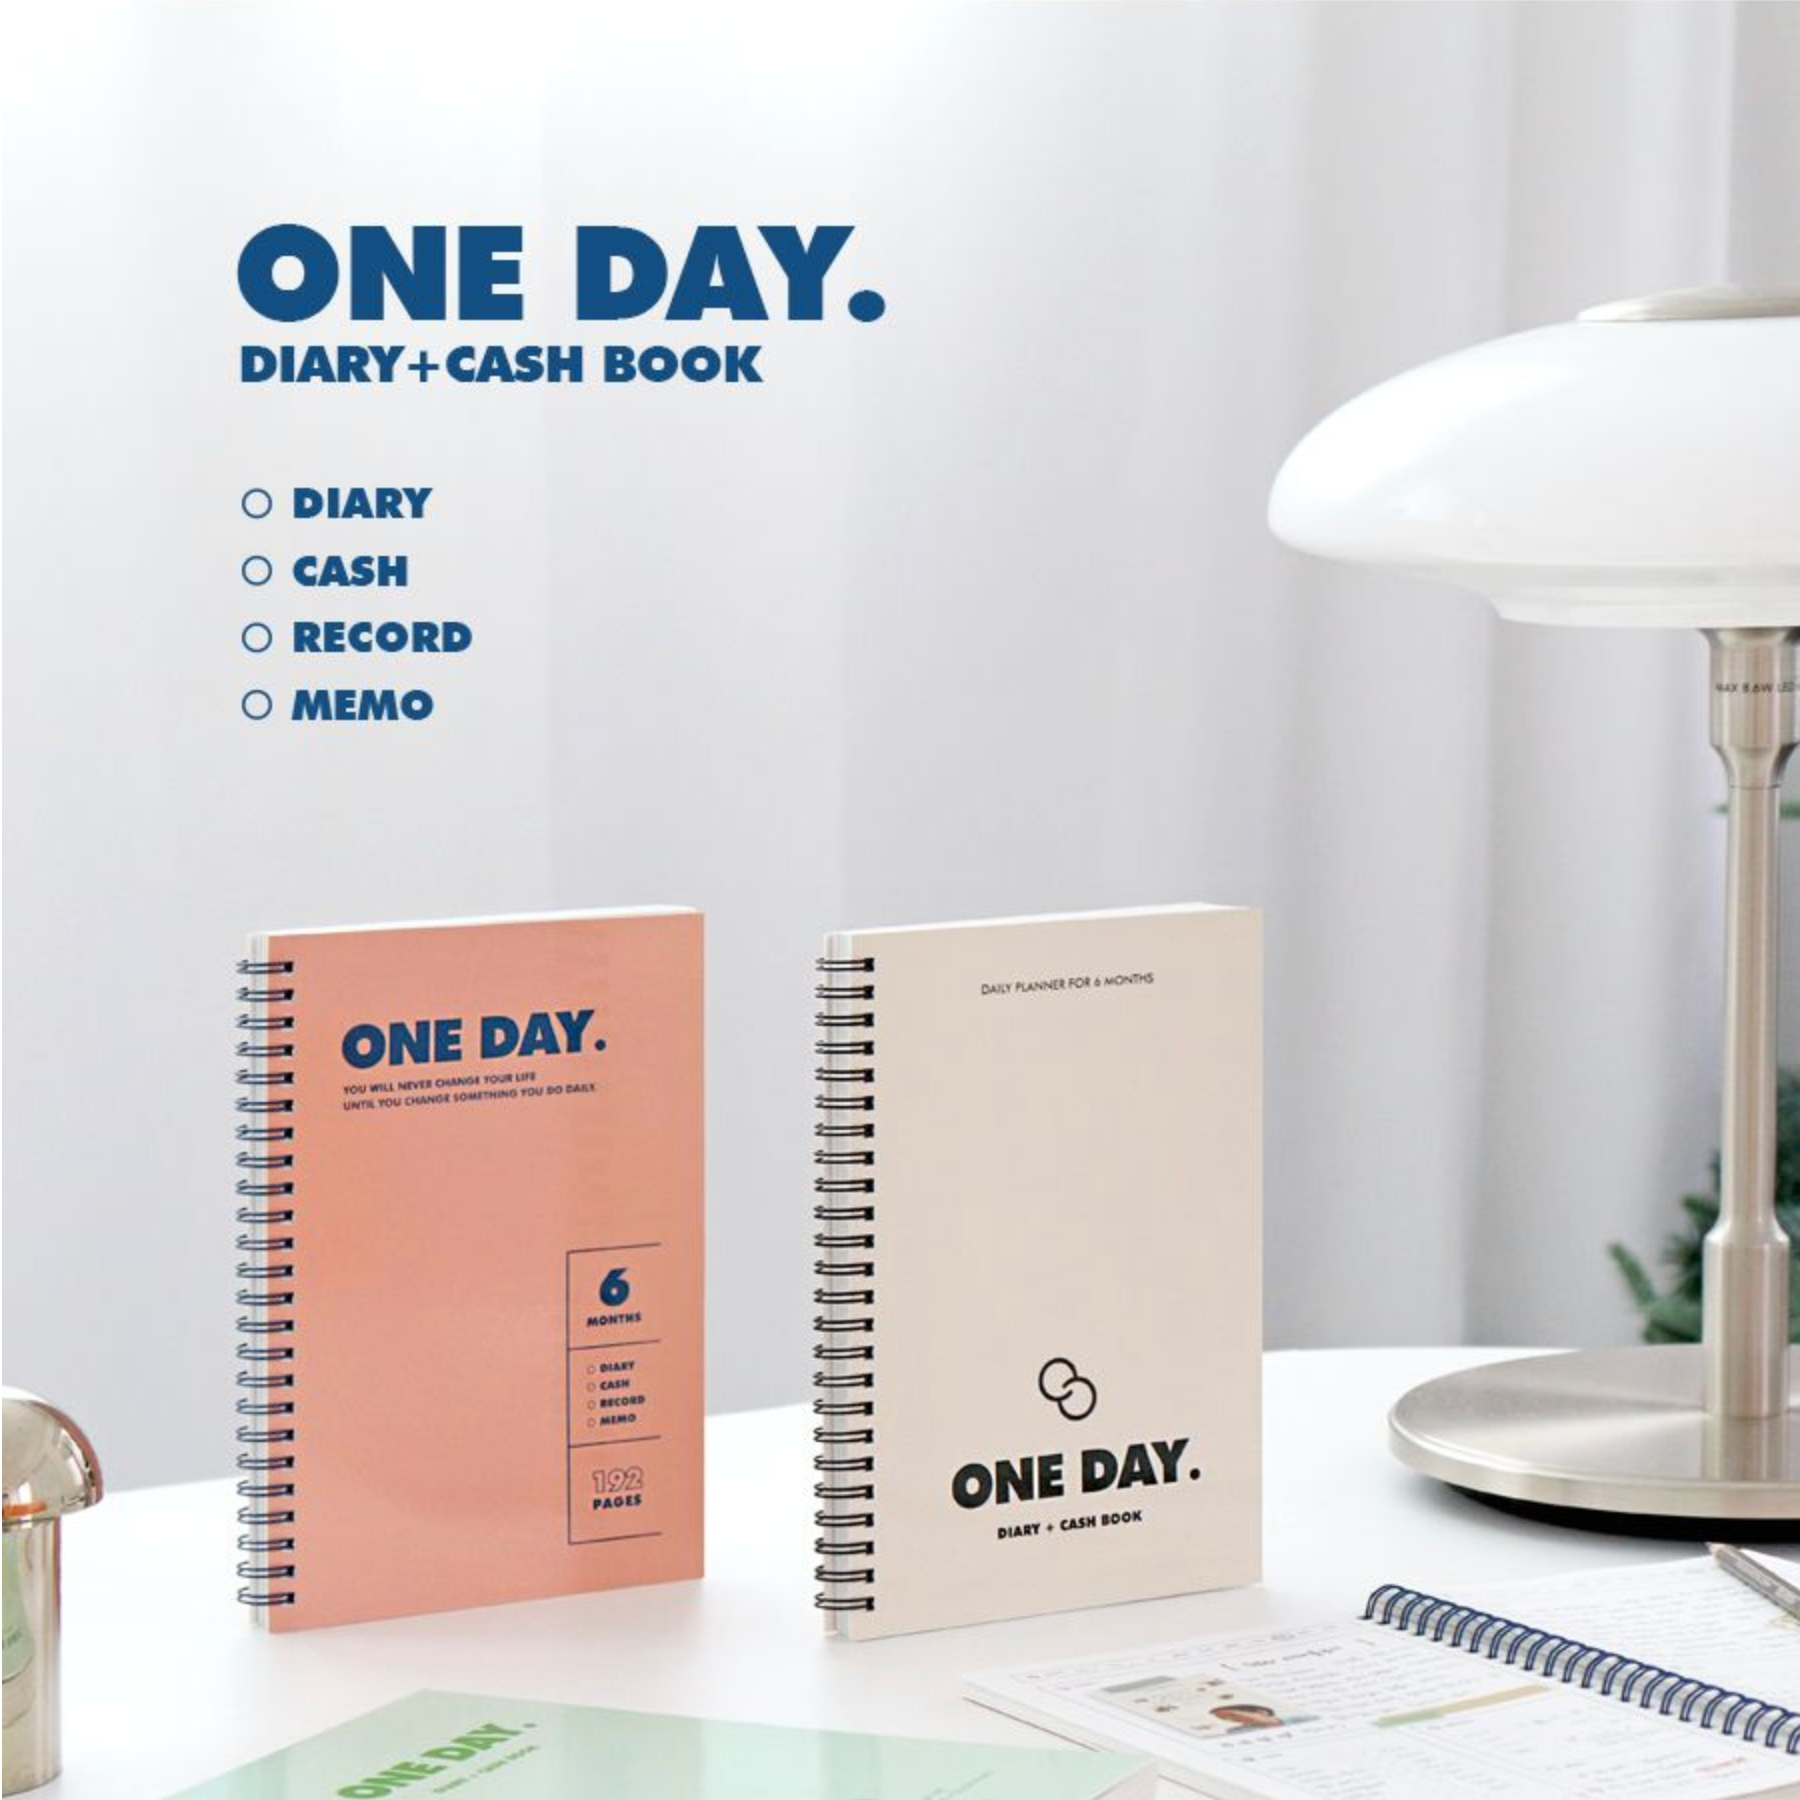 One Day Diary + Cash Book for 6 Months